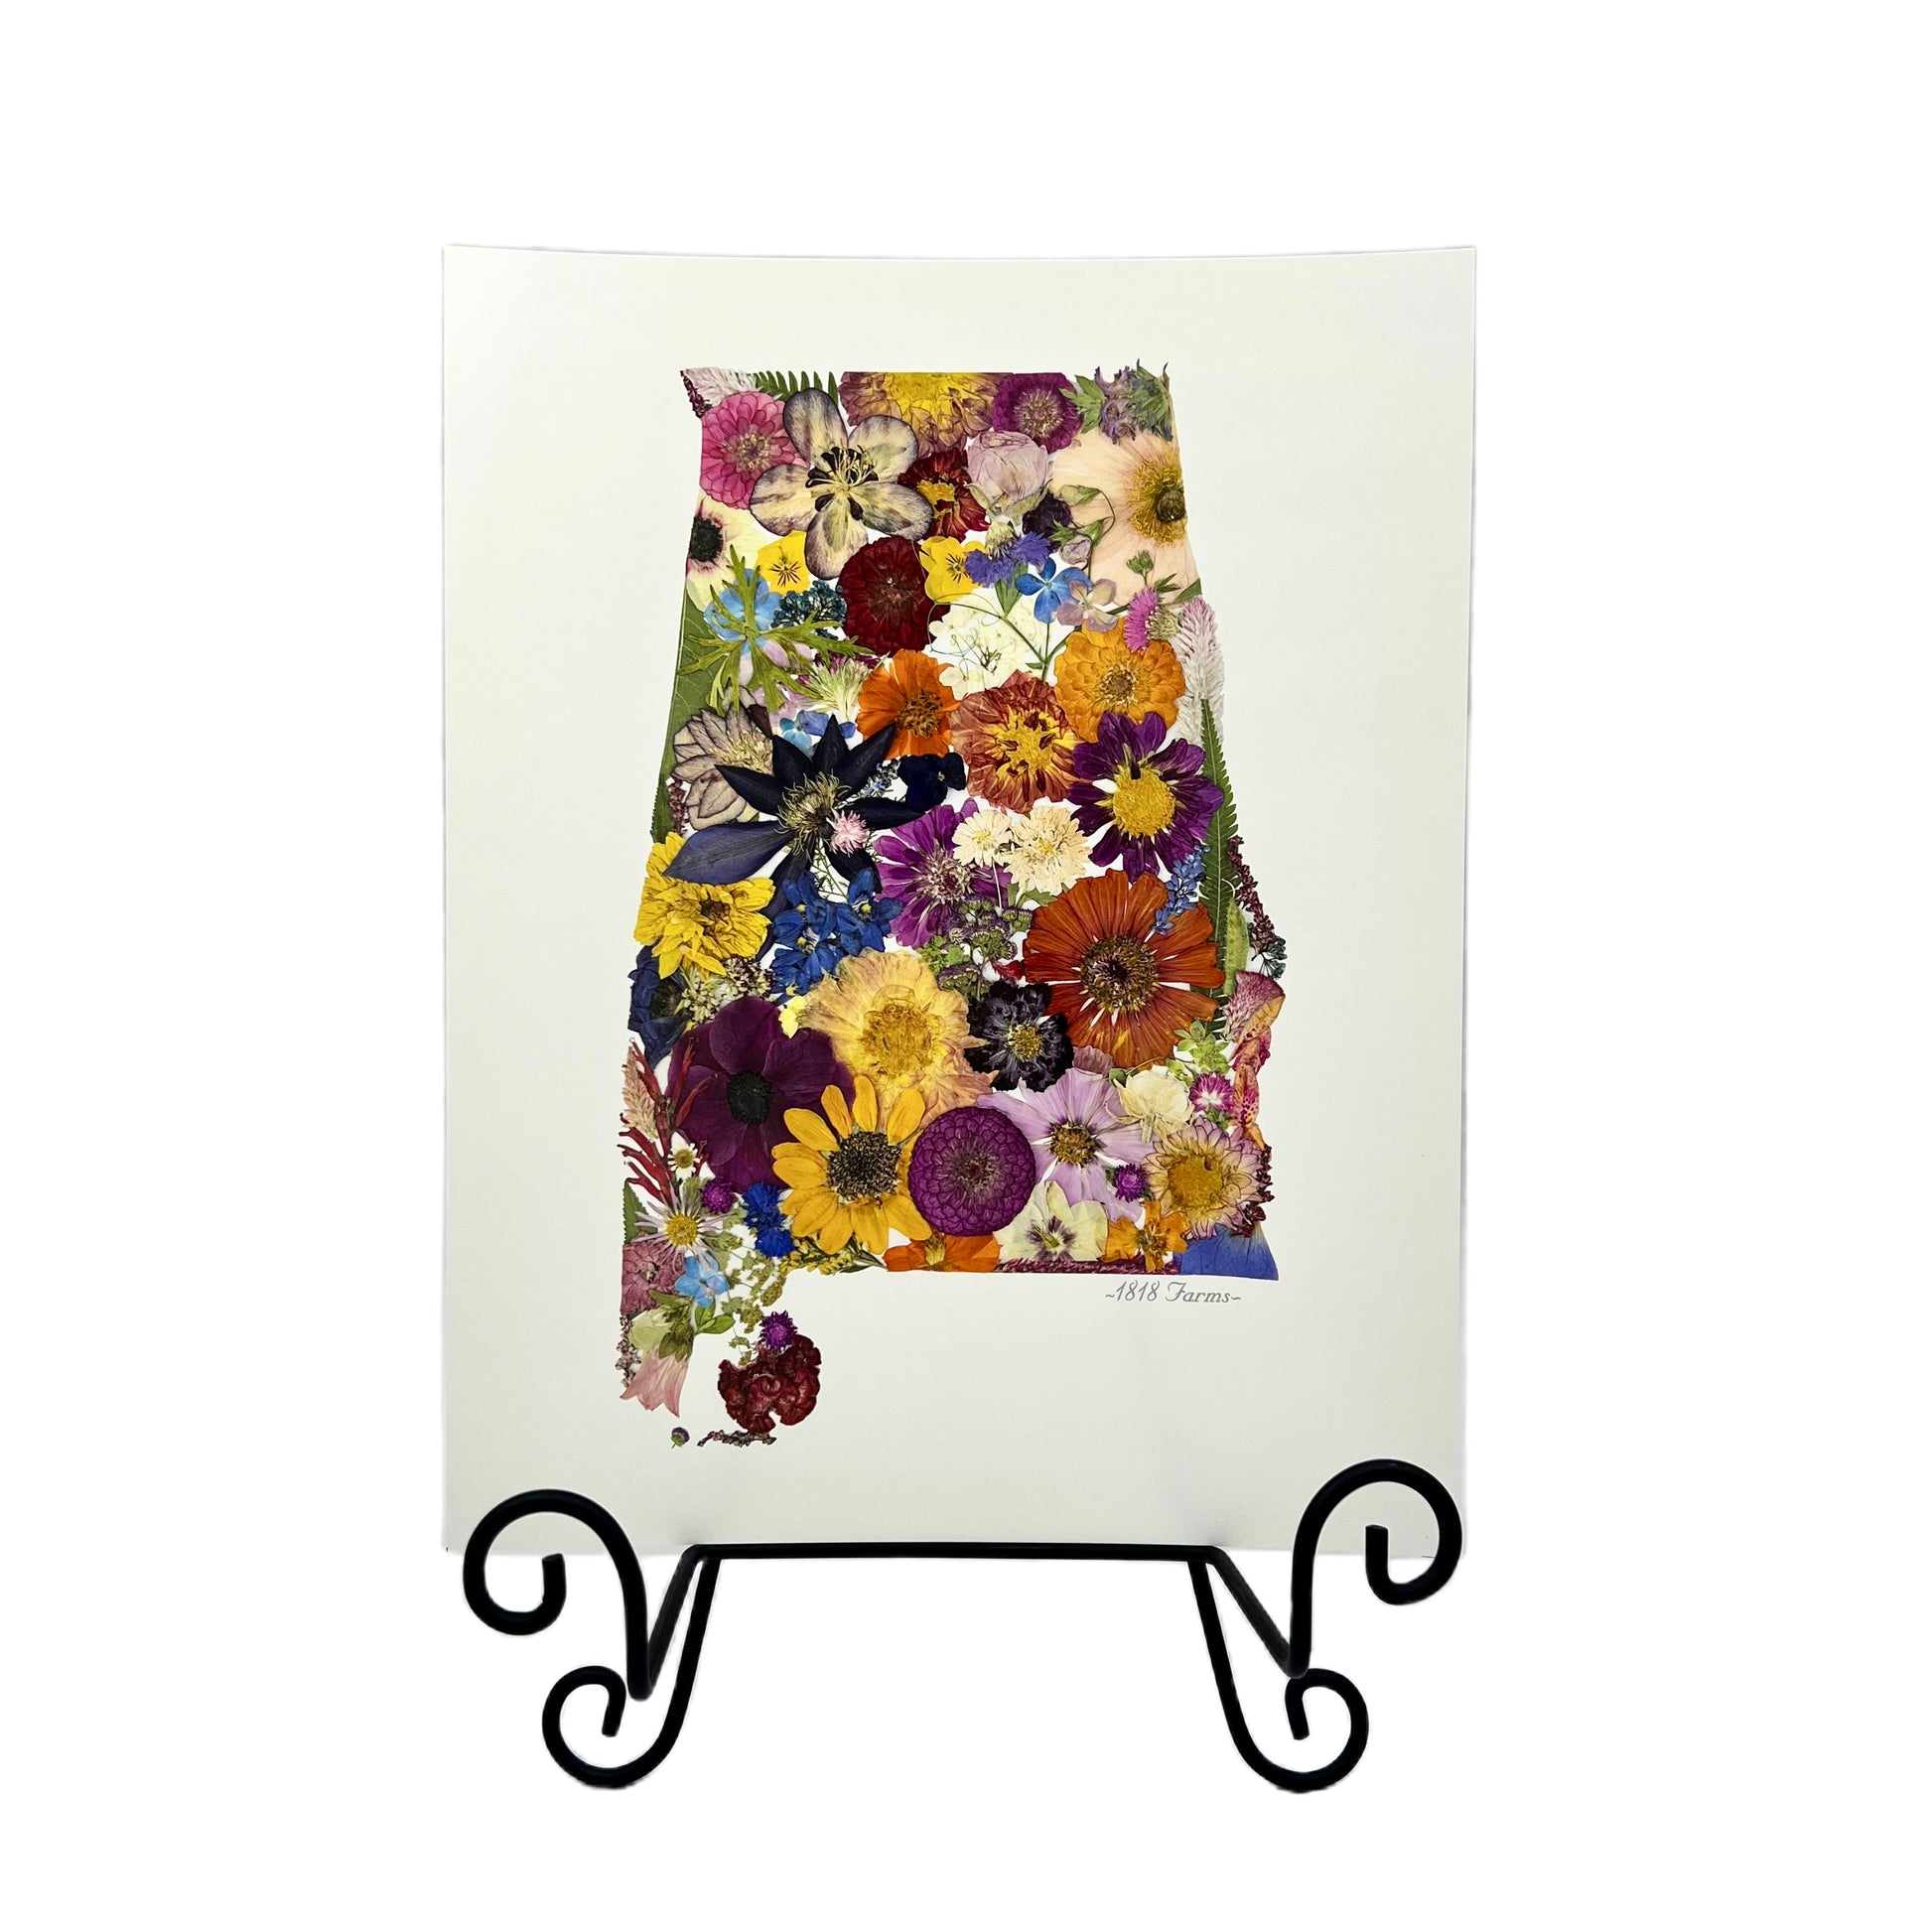 State Themed Giclée Print  - "Where I Bloom" Collection Giclee Art Print 1818 Farms   